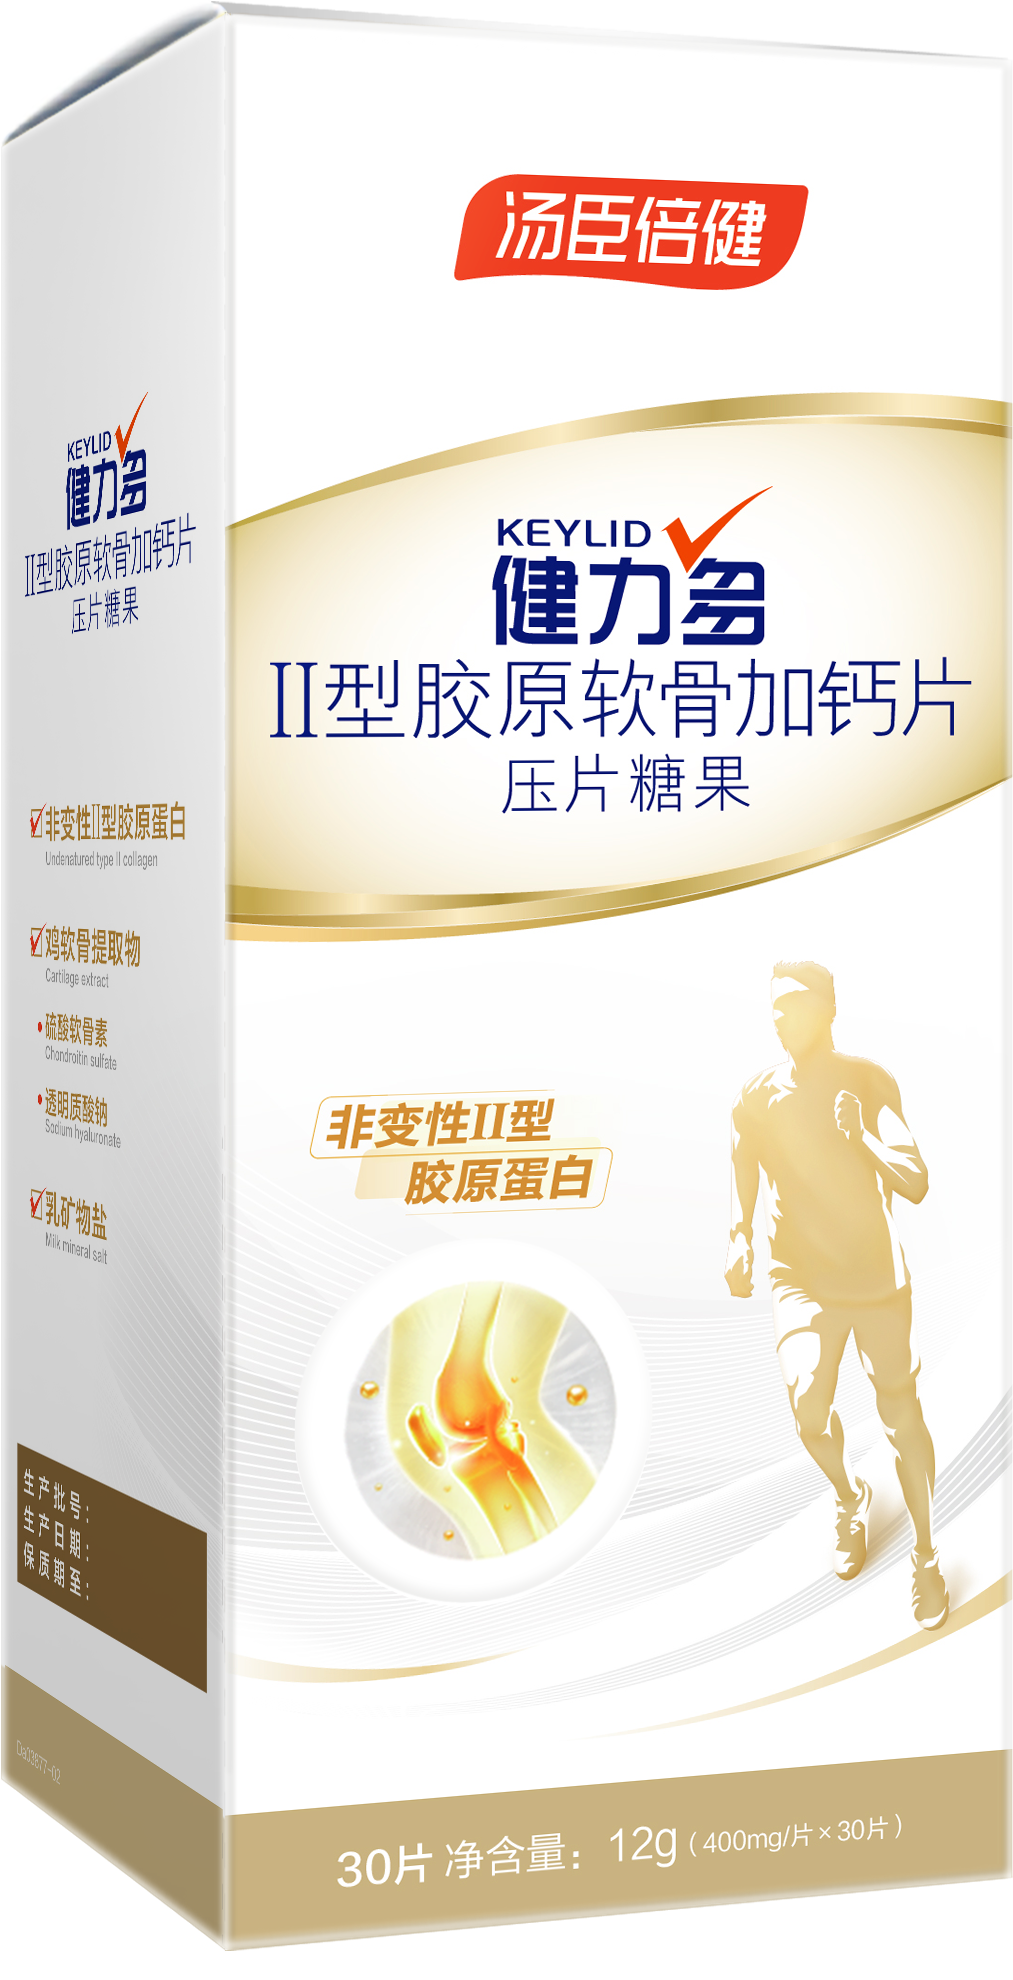 Bioiberica collaboration brings collagen product to Chinese joint health market 